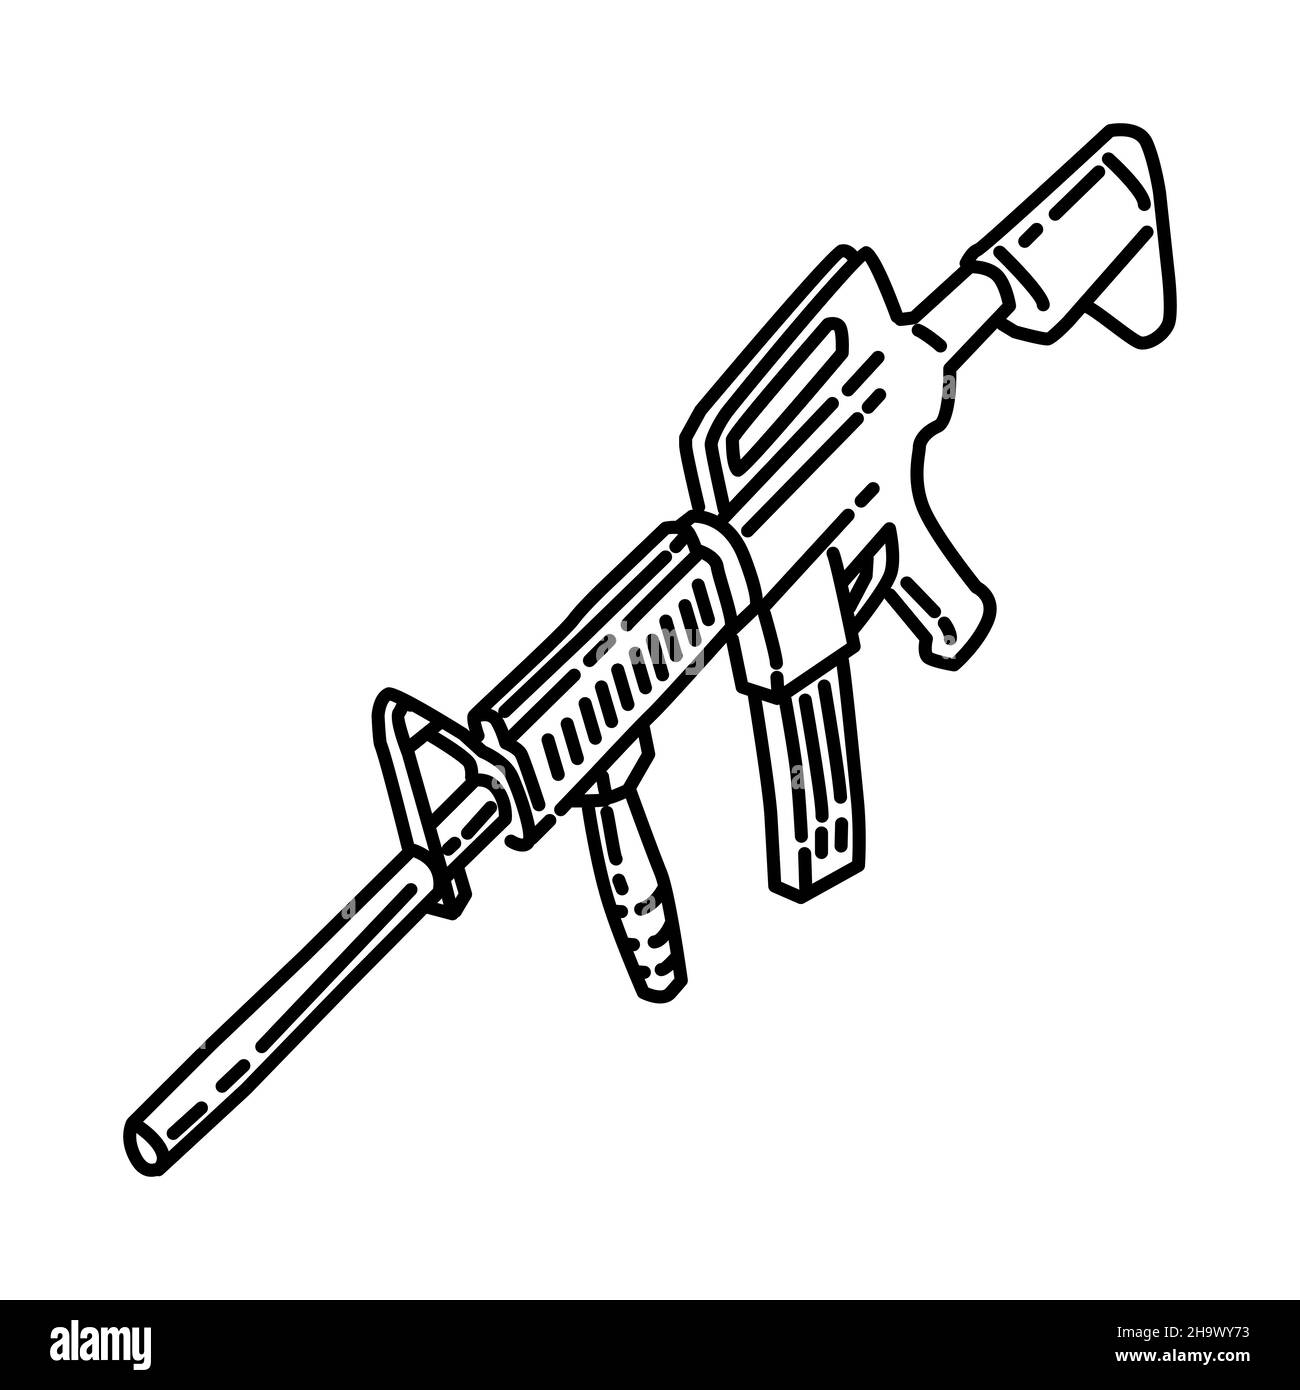 Navy Seal Rifle Part of Military and Navy Force Equipments Hand Drawn Icon Set Vector. Stock Vector